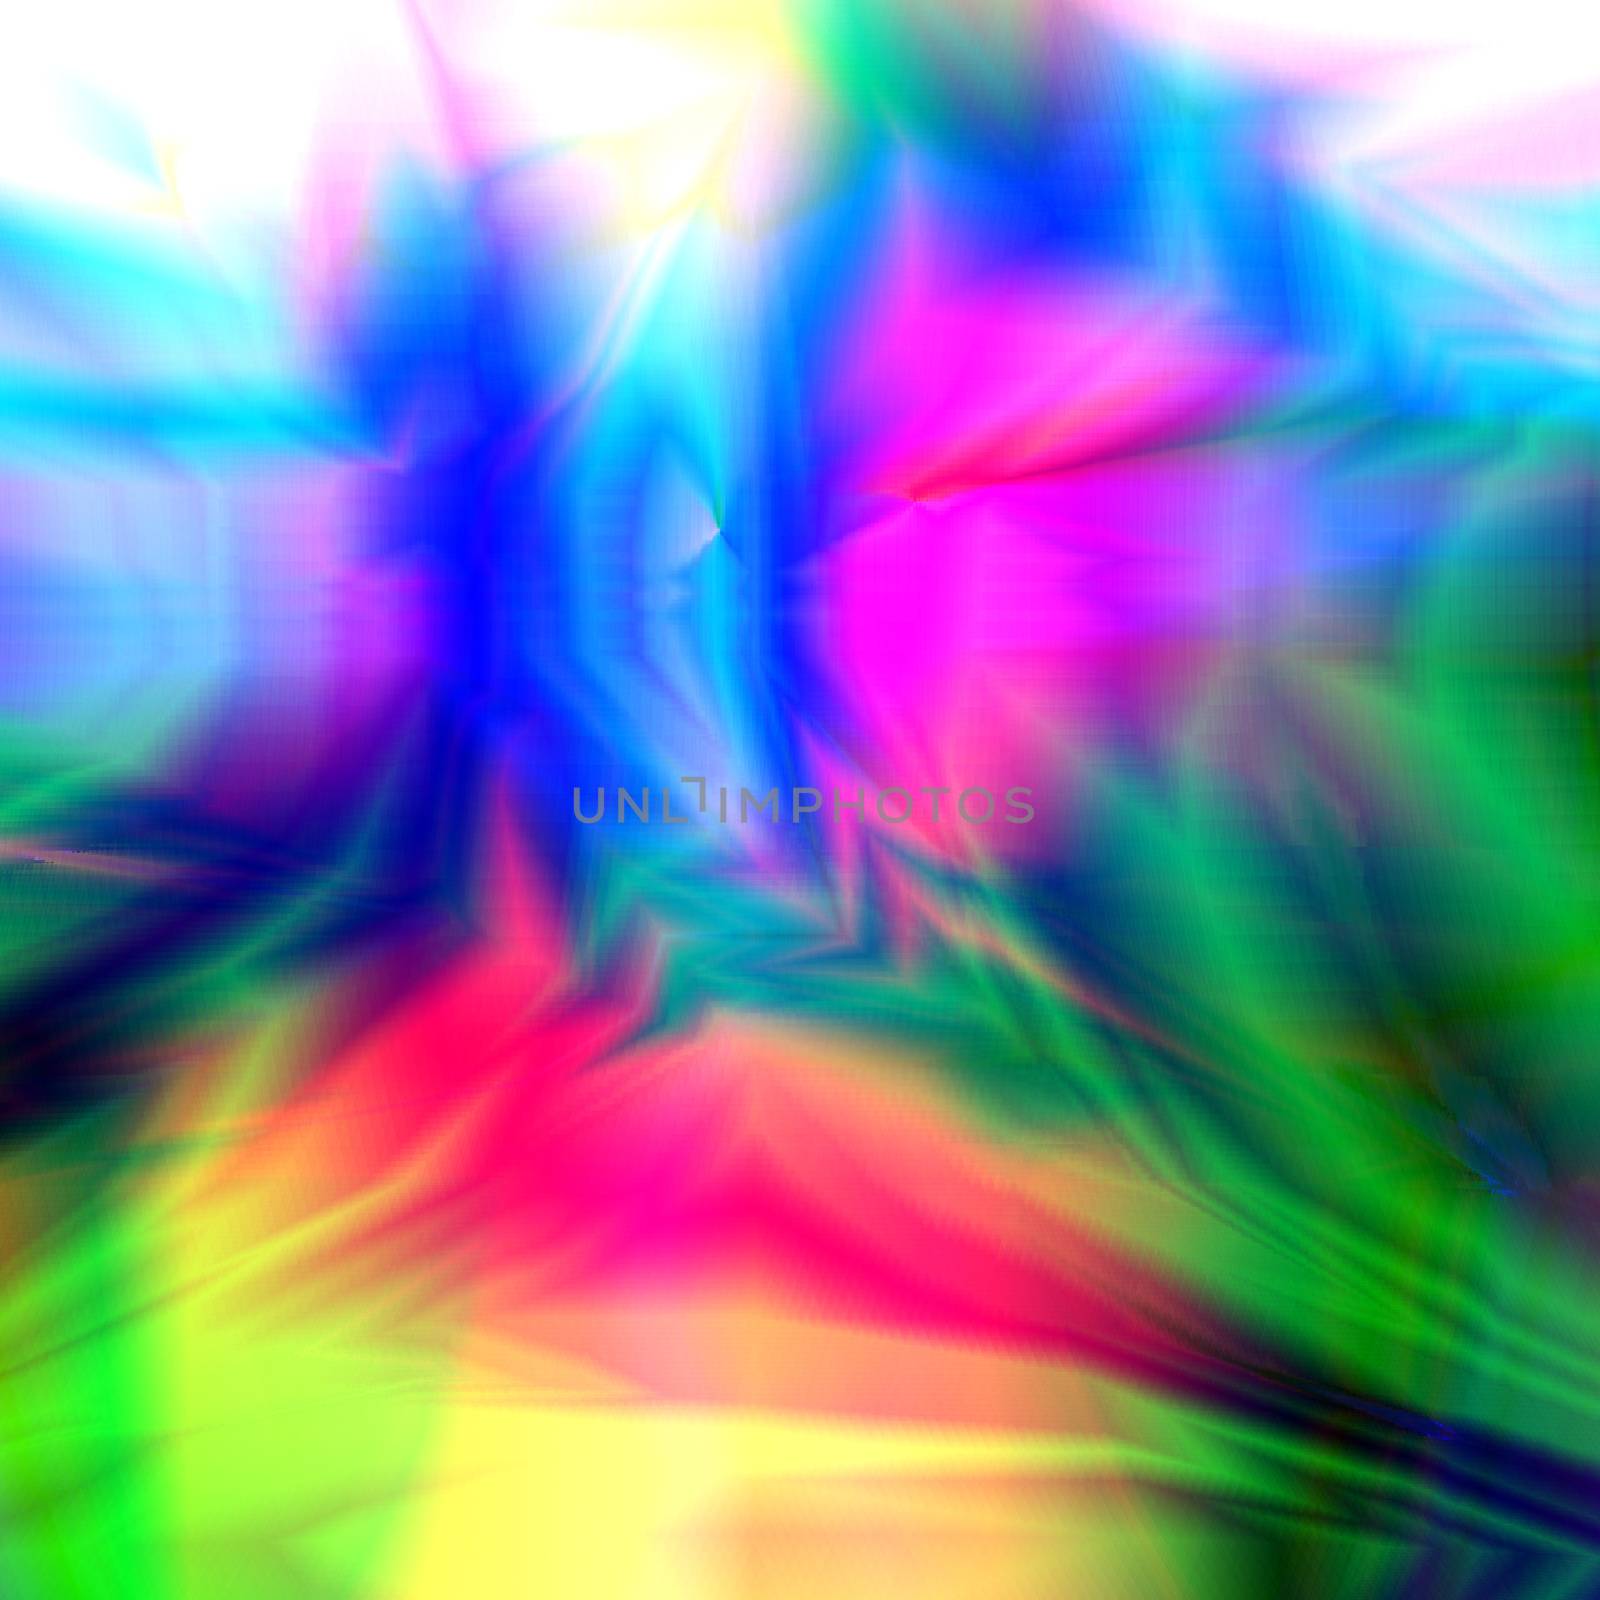 Colorful abstract glitched background by Vanzyst